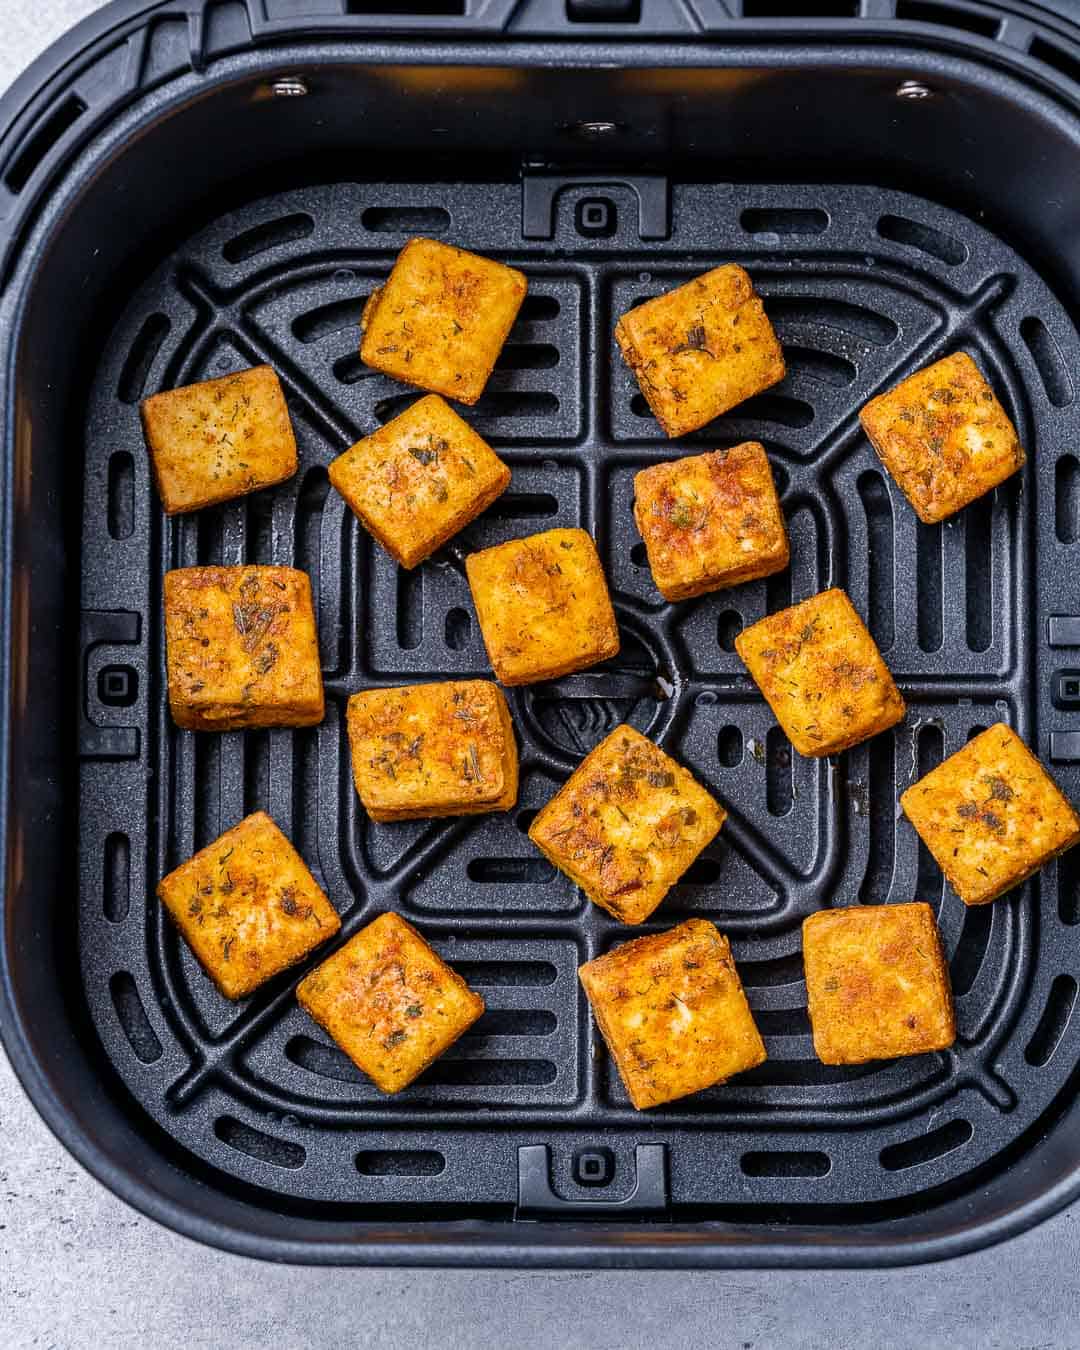 Cooking tofu in an air fryer.